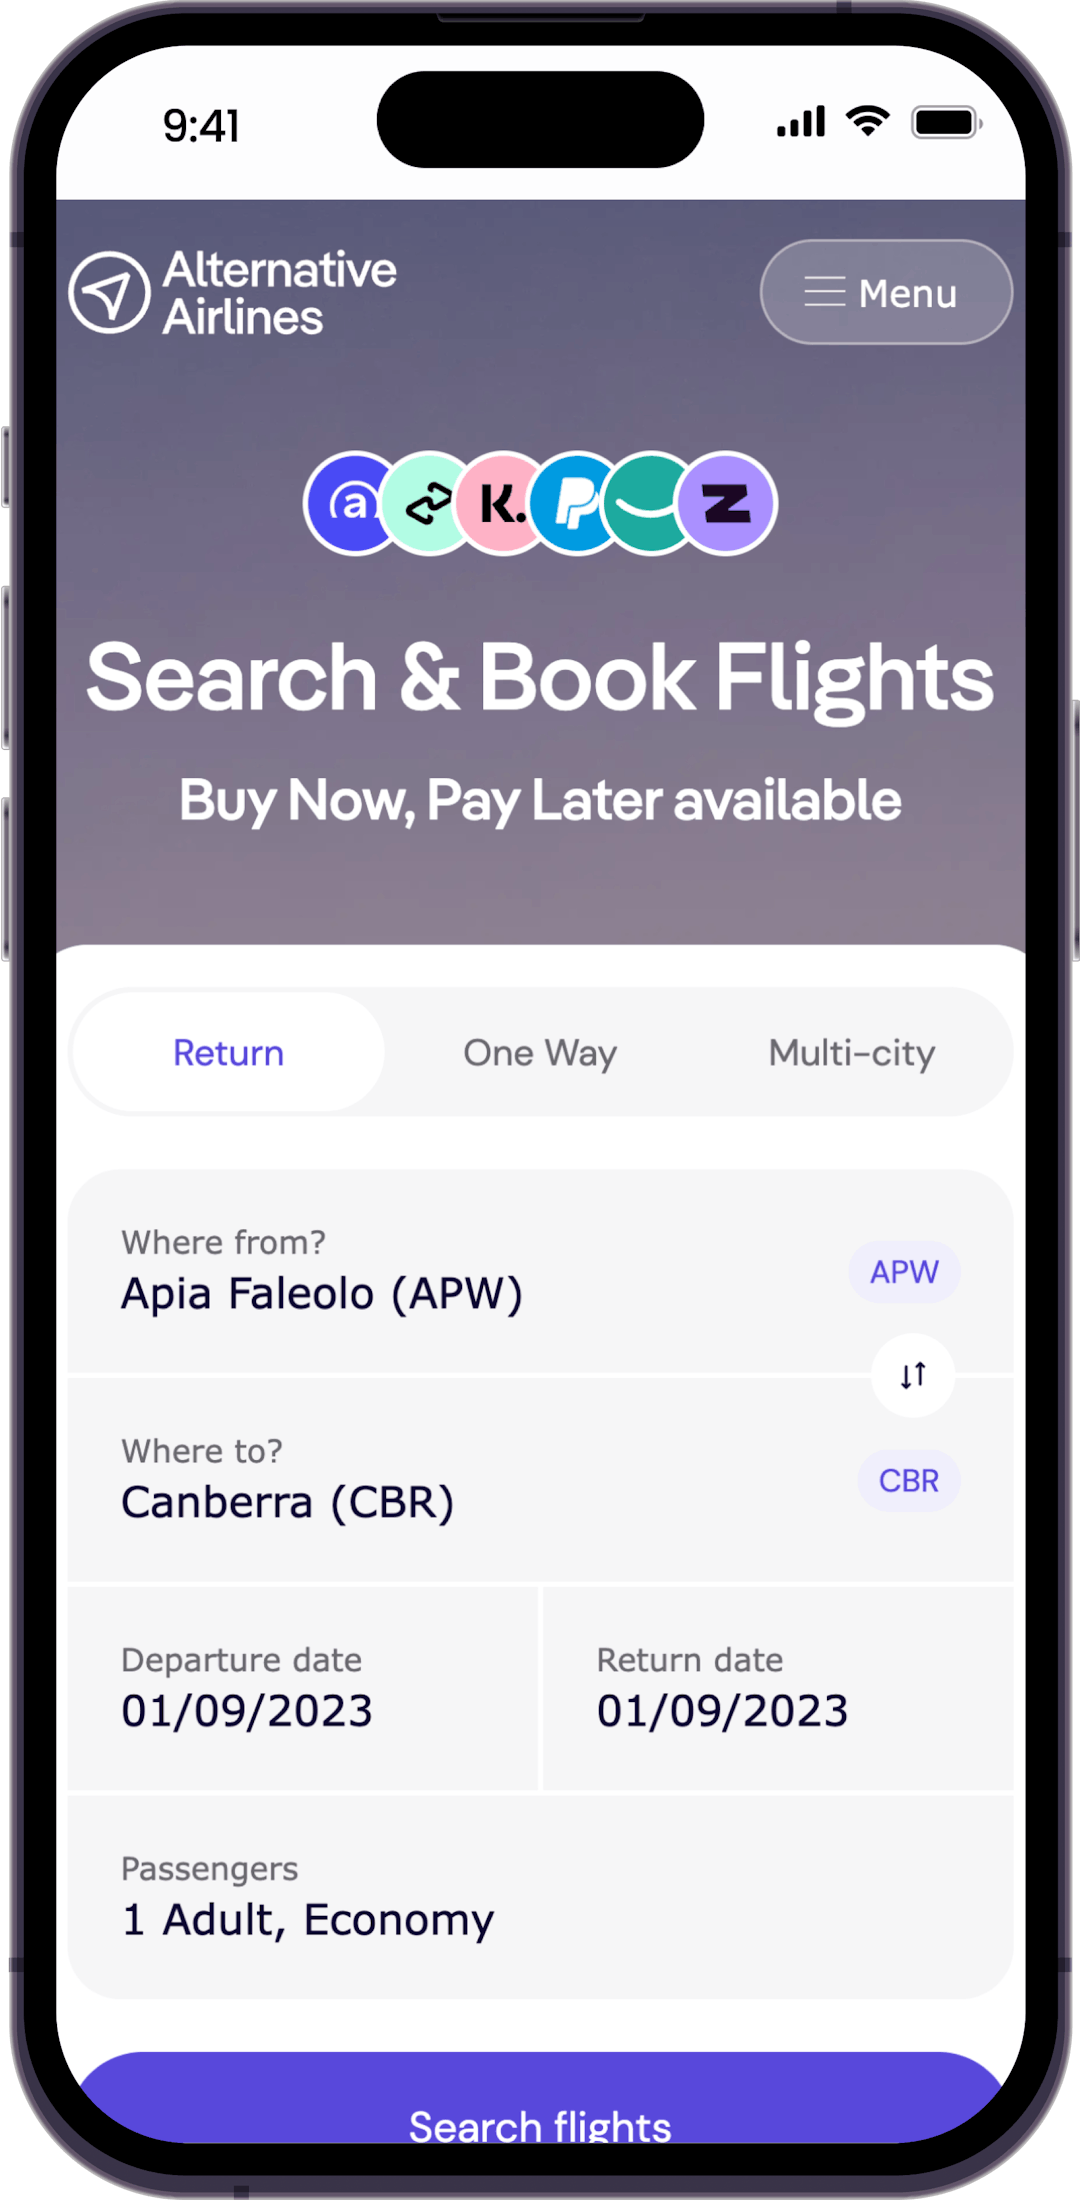 Step 1 - Search for flights on Alternative Airlines